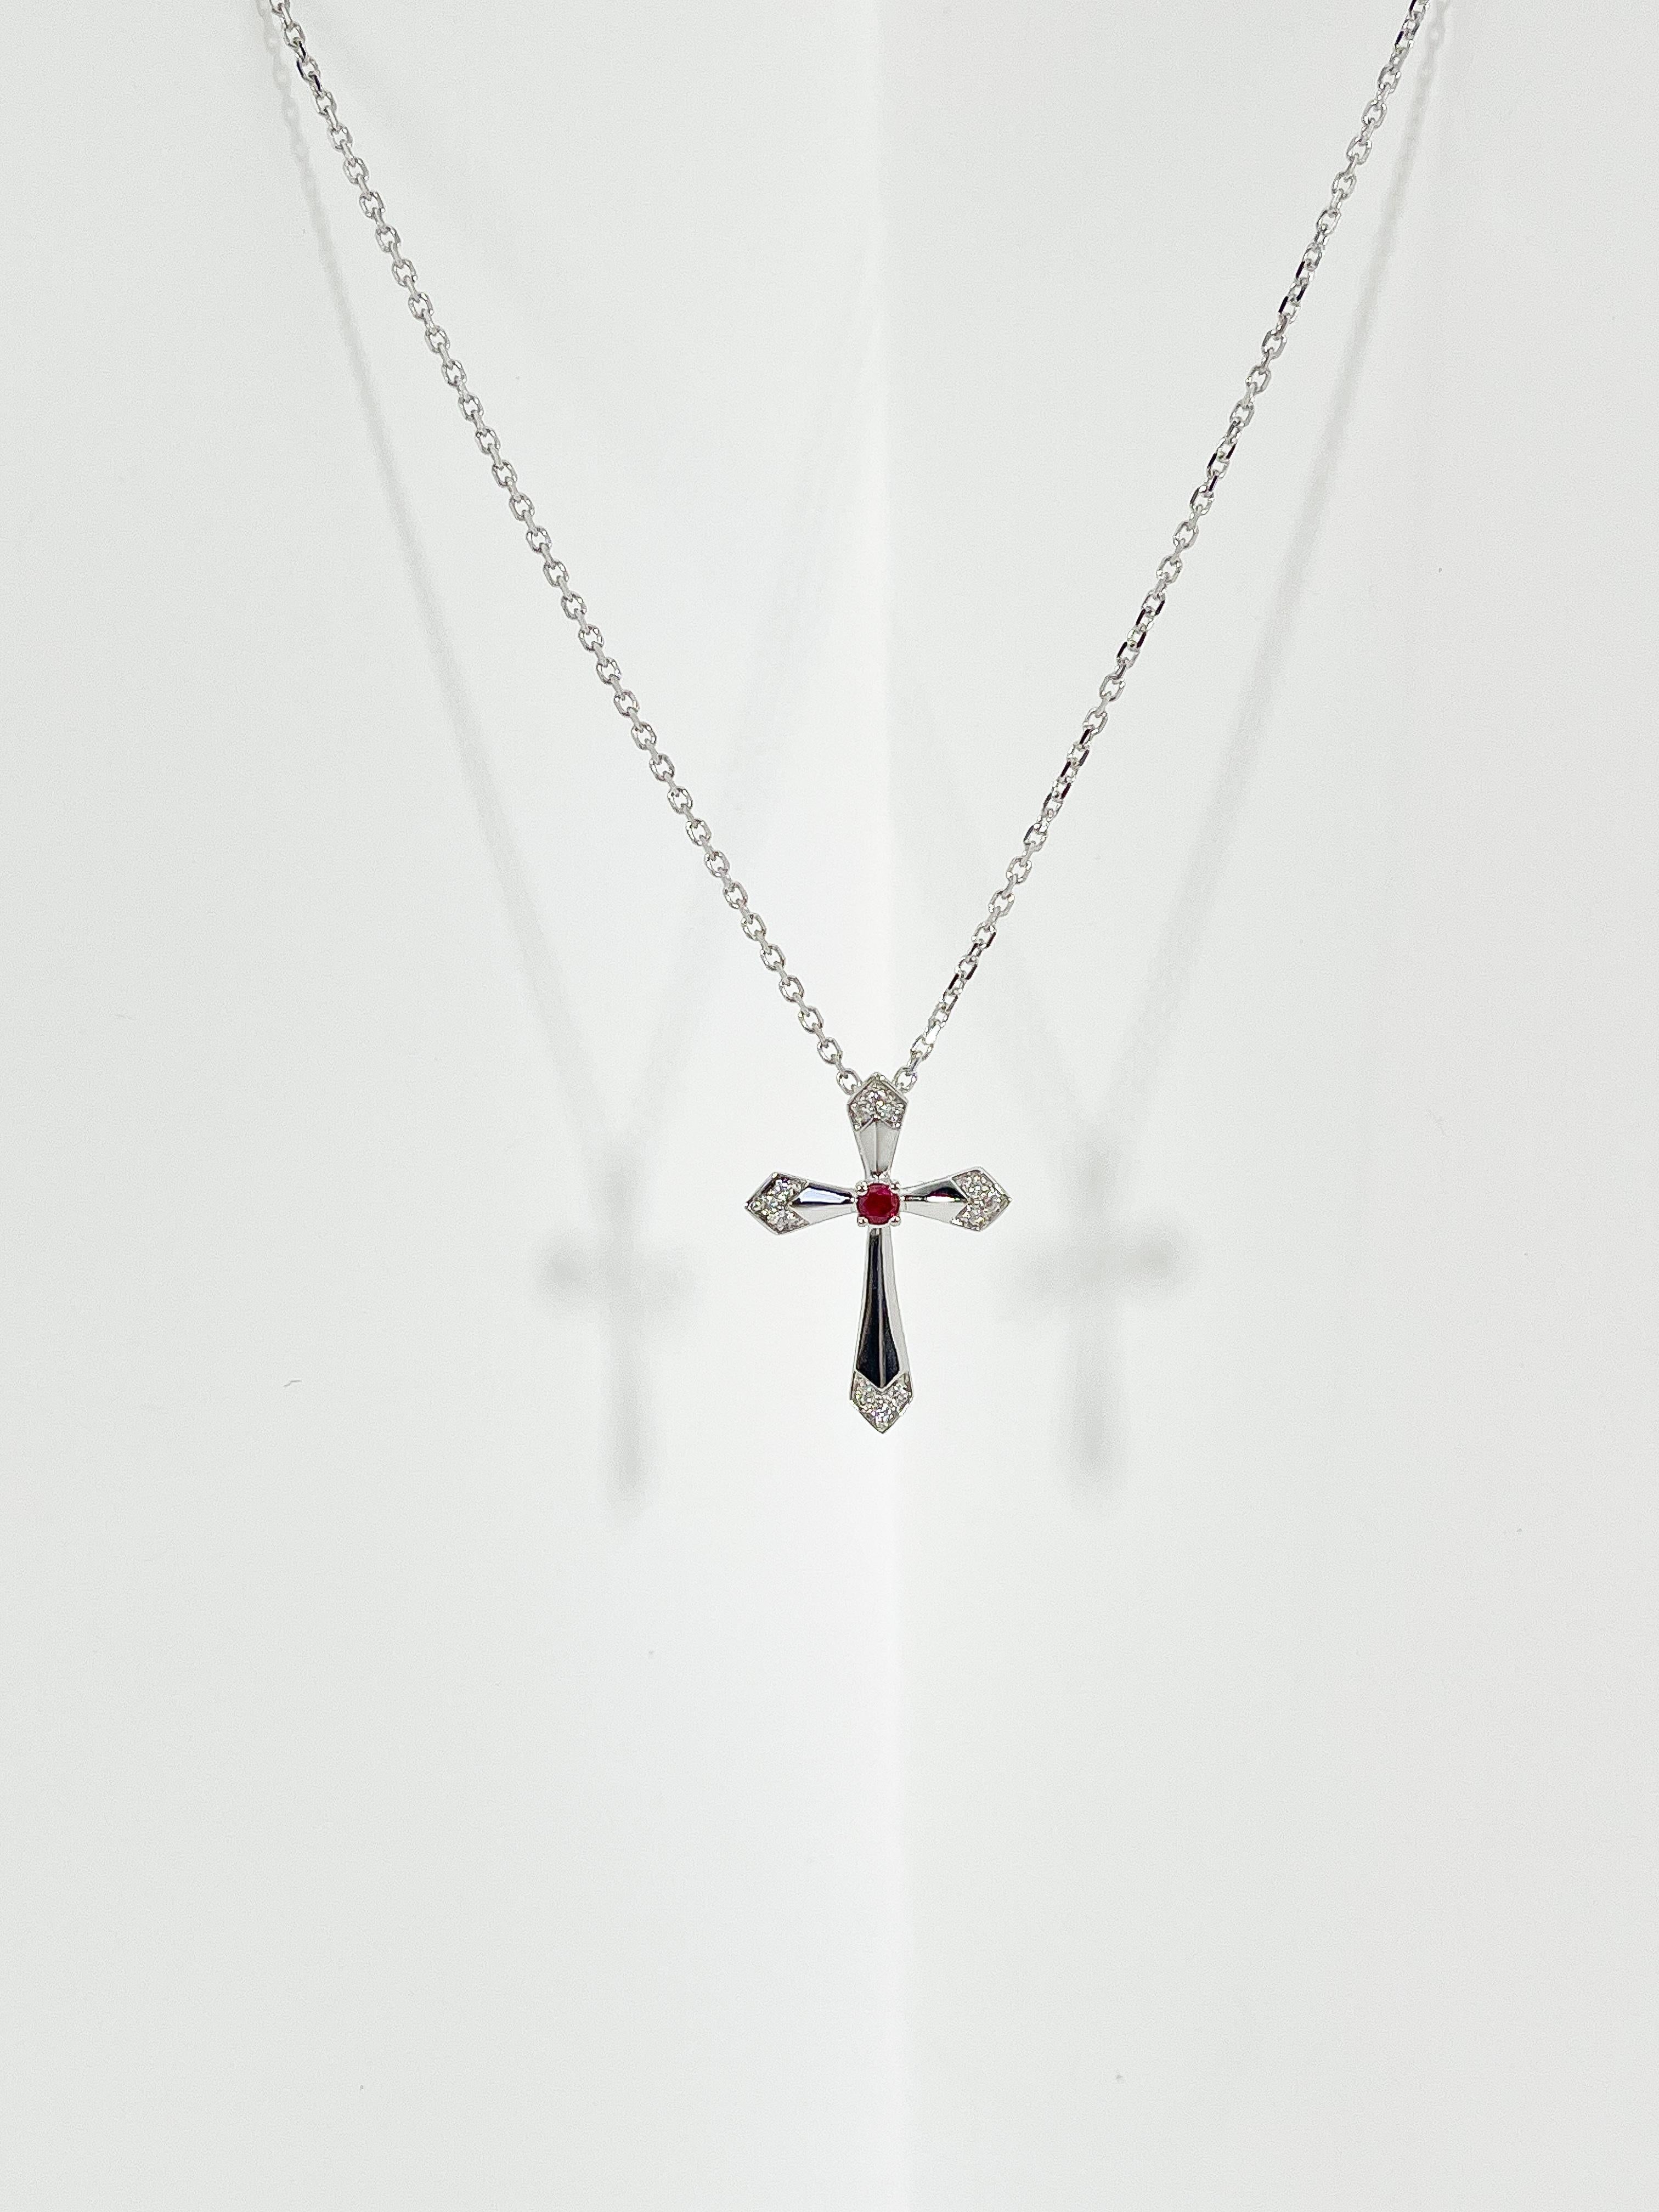 18k white gold .06 CTW diamond and .07 CT ruby cross necklace. All stones in this necklace are round, has a lobster clasp to open and close, the length of the necklace is 18 inches, the cross measures 21 x 15.5 mm, and it has a total weight of 3.4